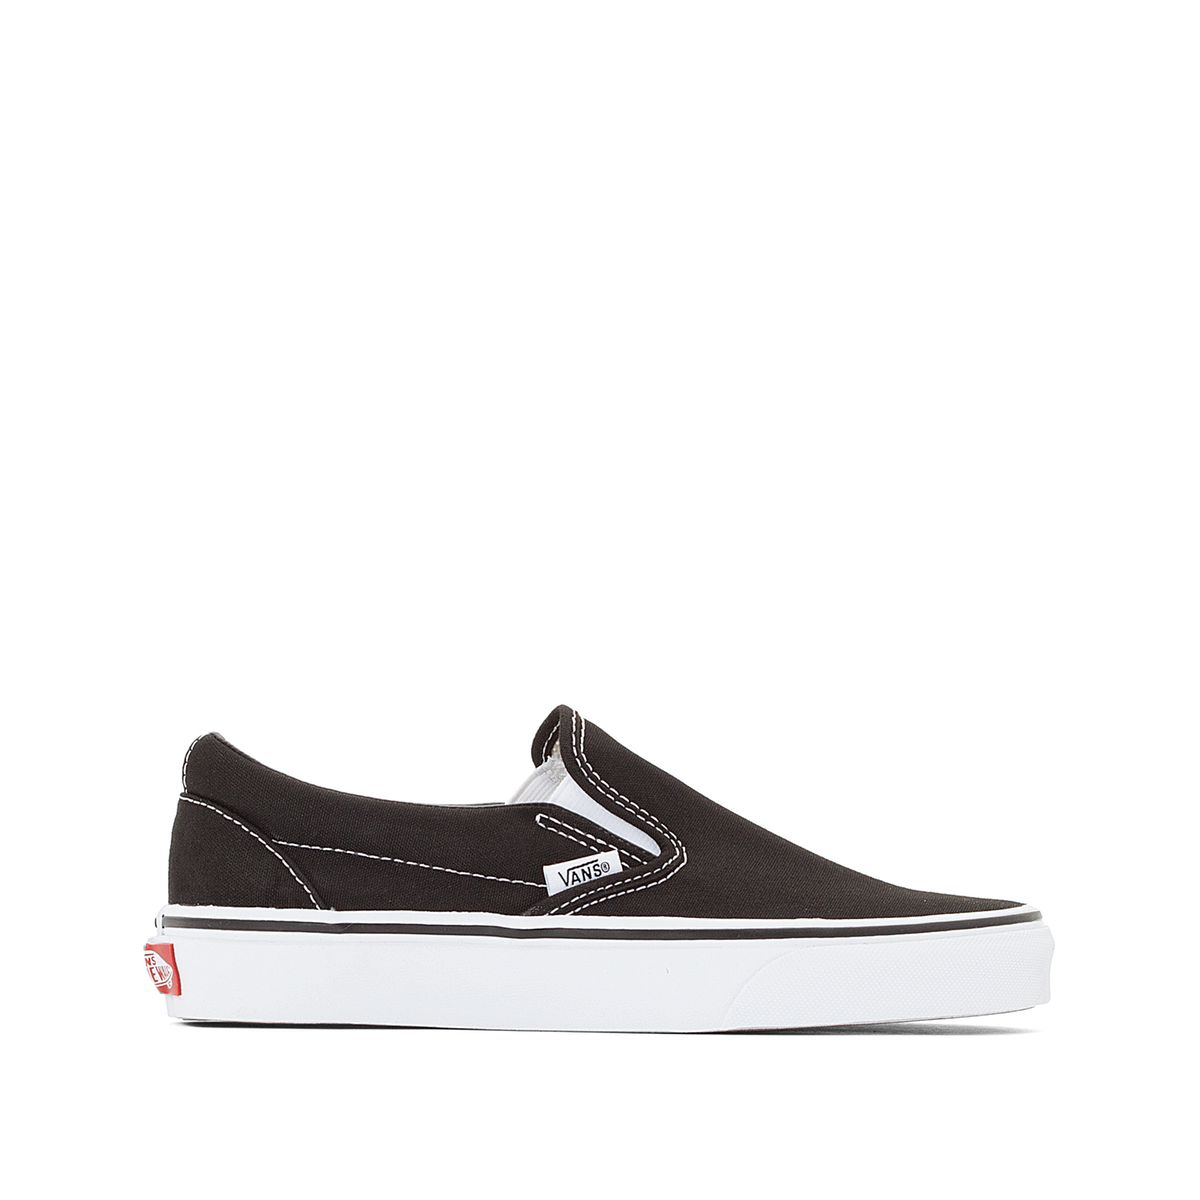 Chaussures Chaussures basses Slips-on Slip-on noir style d\u00e9contract\u00e9 